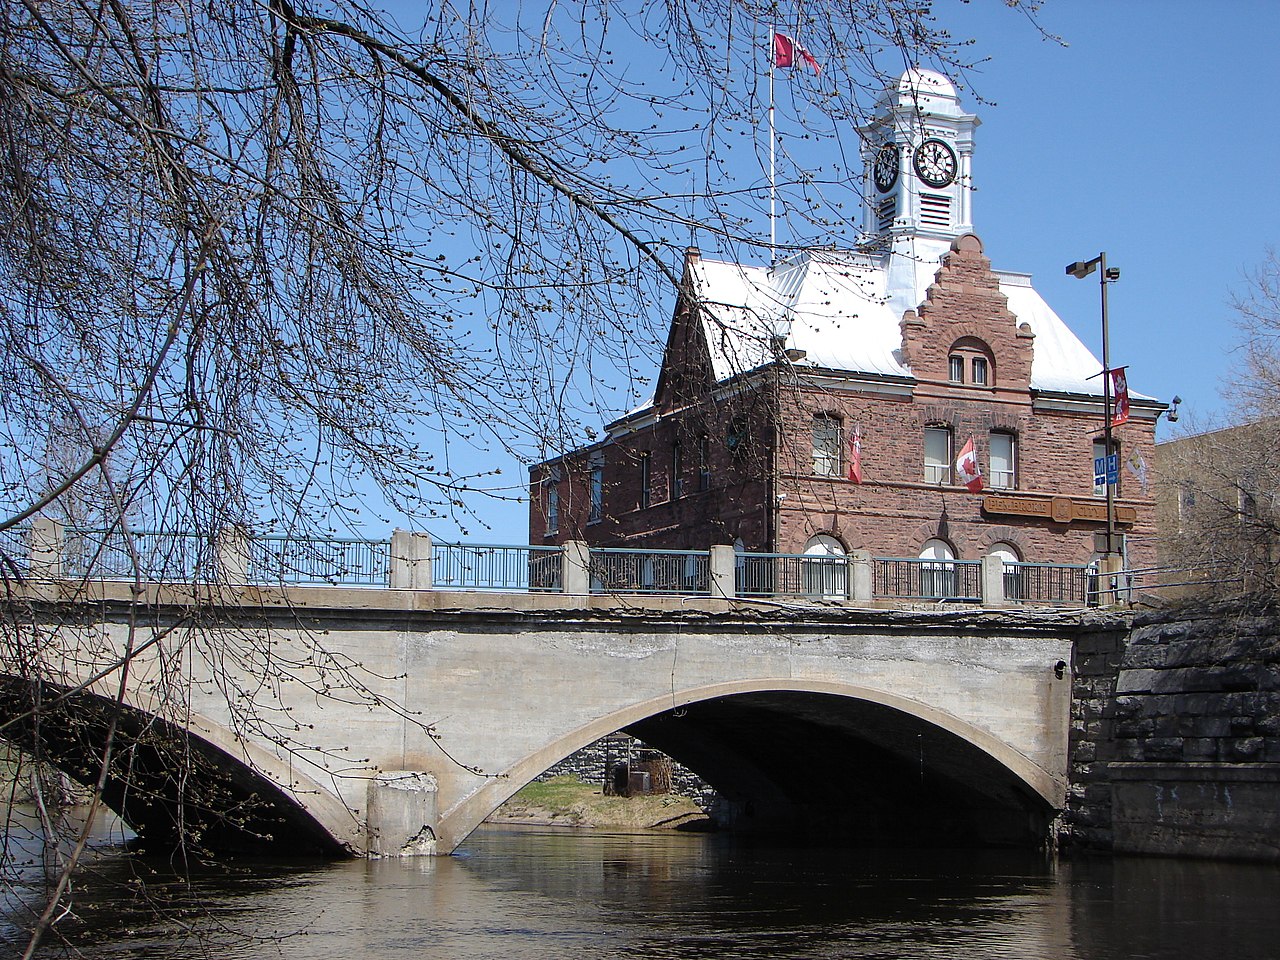 Pembroke Street Bridge crossing the Muskrat River, with City Hall in the background.